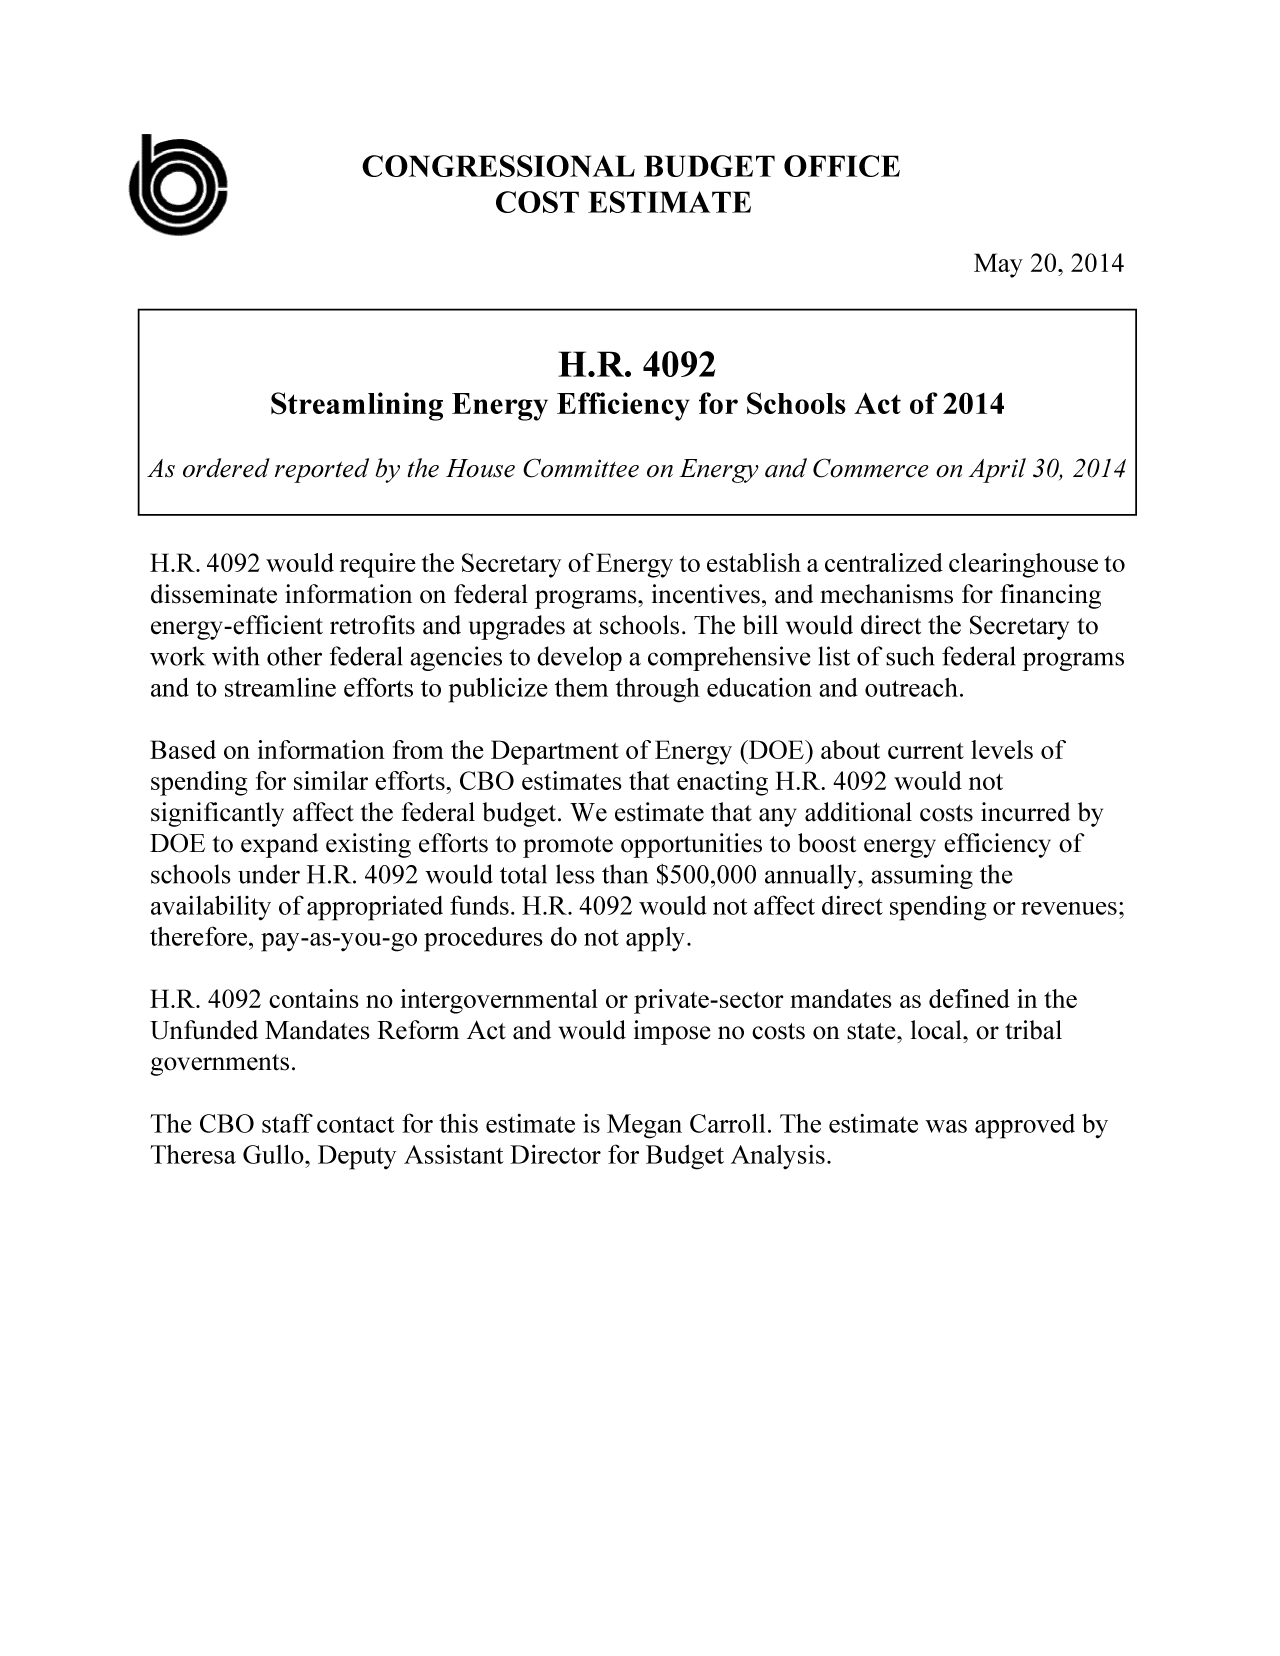 handle is hein.congrec/cbo1647 and id is 1 raw text is: CONGRESSIONAL BUDGET OFFICE
0'                          COST ESTIMATE
May 20, 2014
H.R. 4092
Streamlining Energy Efficiency for Schools Act of 2014
As ordered reported by the House Committee on Energy and Commerce on April 30, 2014
H.R. 4092 would require the Secretary of Energy to establish a centralized clearinghouse to
disseminate information on federal programs, incentives, and mechanisms for financing
energy-efficient retrofits and upgrades at schools. The bill would direct the Secretary to
work with other federal agencies to develop a comprehensive list of such federal programs
and to streamline efforts to publicize them through education and outreach.
Based on information from the Department of Energy (DOE) about current levels of
spending for similar efforts, CBO estimates that enacting H.R. 4092 would not
significantly affect the federal budget. We estimate that any additional costs incurred by
DOE to expand existing efforts to promote opportunities to boost energy efficiency of
schools under H.R. 4092 would total less than $500,000 annually, assuming the
availability of appropriated funds. H.R. 4092 would not affect direct spending or revenues;
therefore, pay-as-you-go procedures do not apply.
H.R. 4092 contains no intergovernmental or private-sector mandates as defined in the
Unfunded Mandates Reform Act and would impose no costs on state, local, or tribal
governments.
The CBO staff contact for this estimate is Megan Carroll. The estimate was approved by
Theresa Gullo, Deputy Assistant Director for Budget Analysis.


